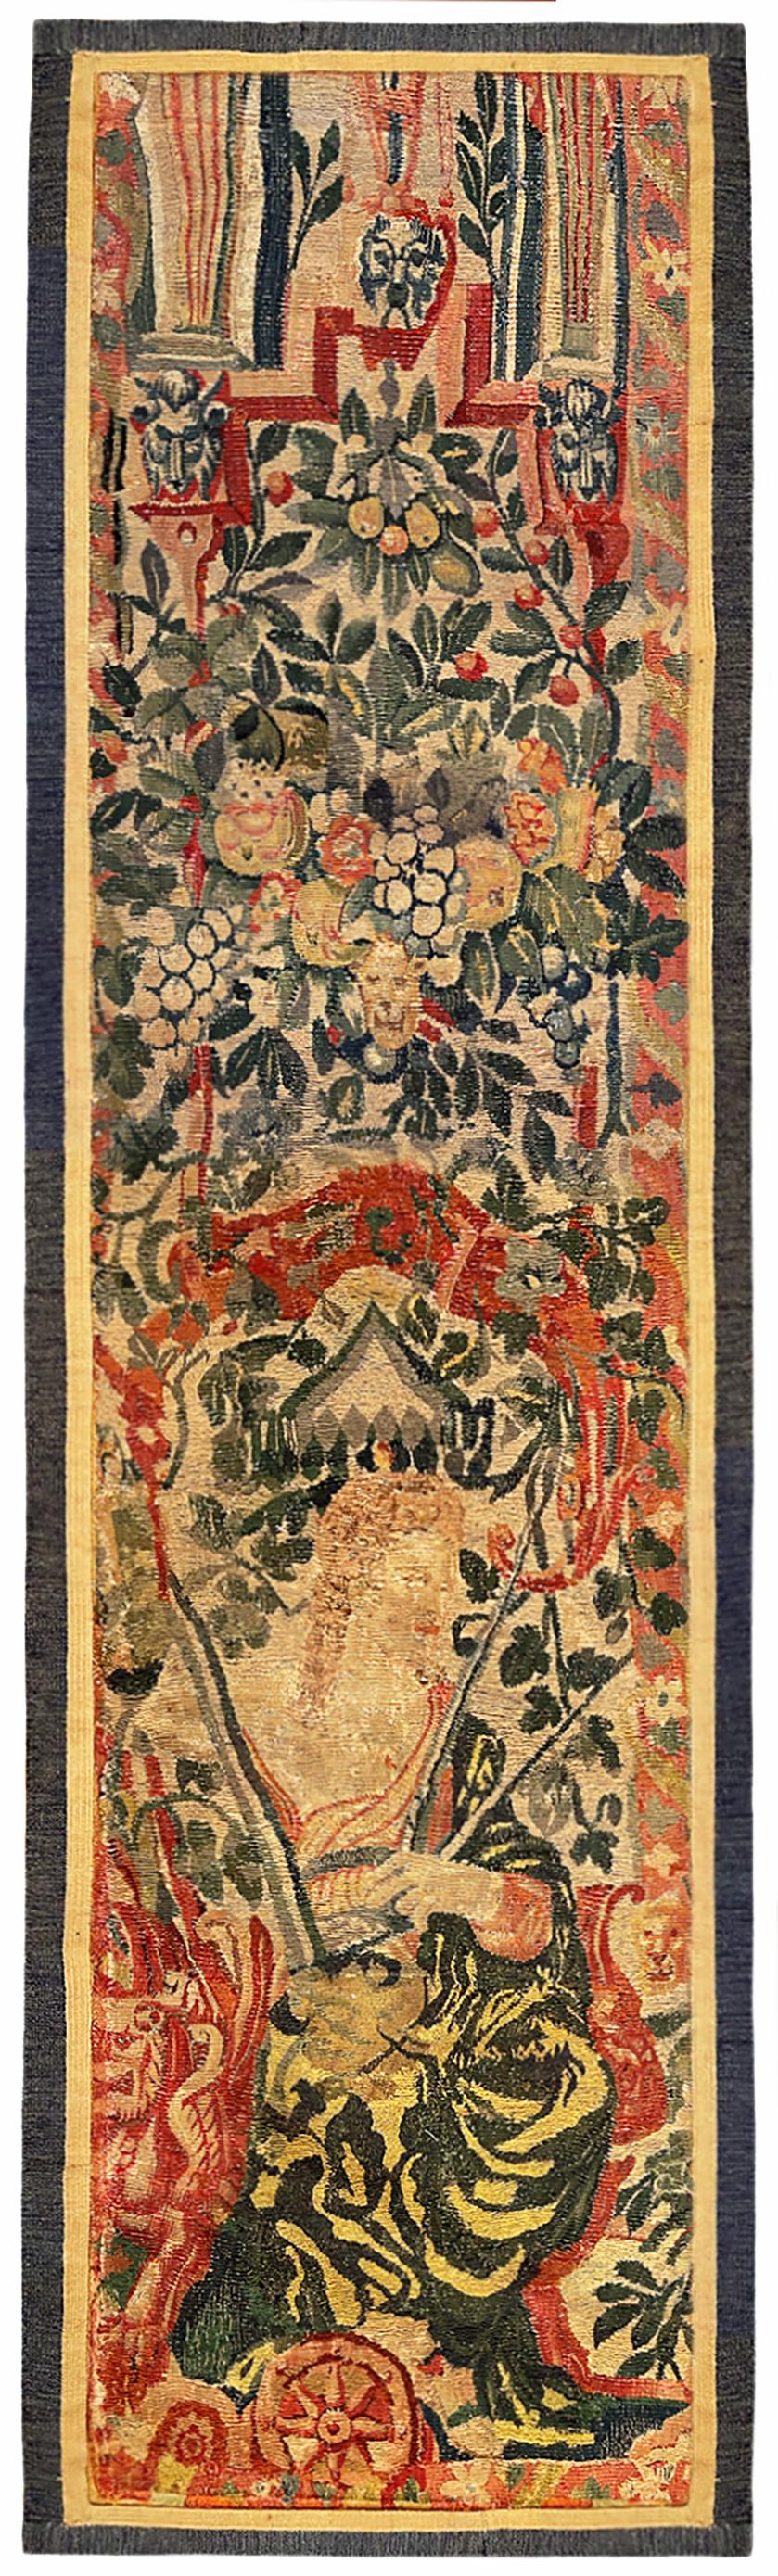 A pair of late 16th century Flemish historical tapestry panels. These vertically oriented decorative tapestry panels depict female figures at bottom, sitting within an elaborate floral reserve, with flowers and with portions of an arch at top. The